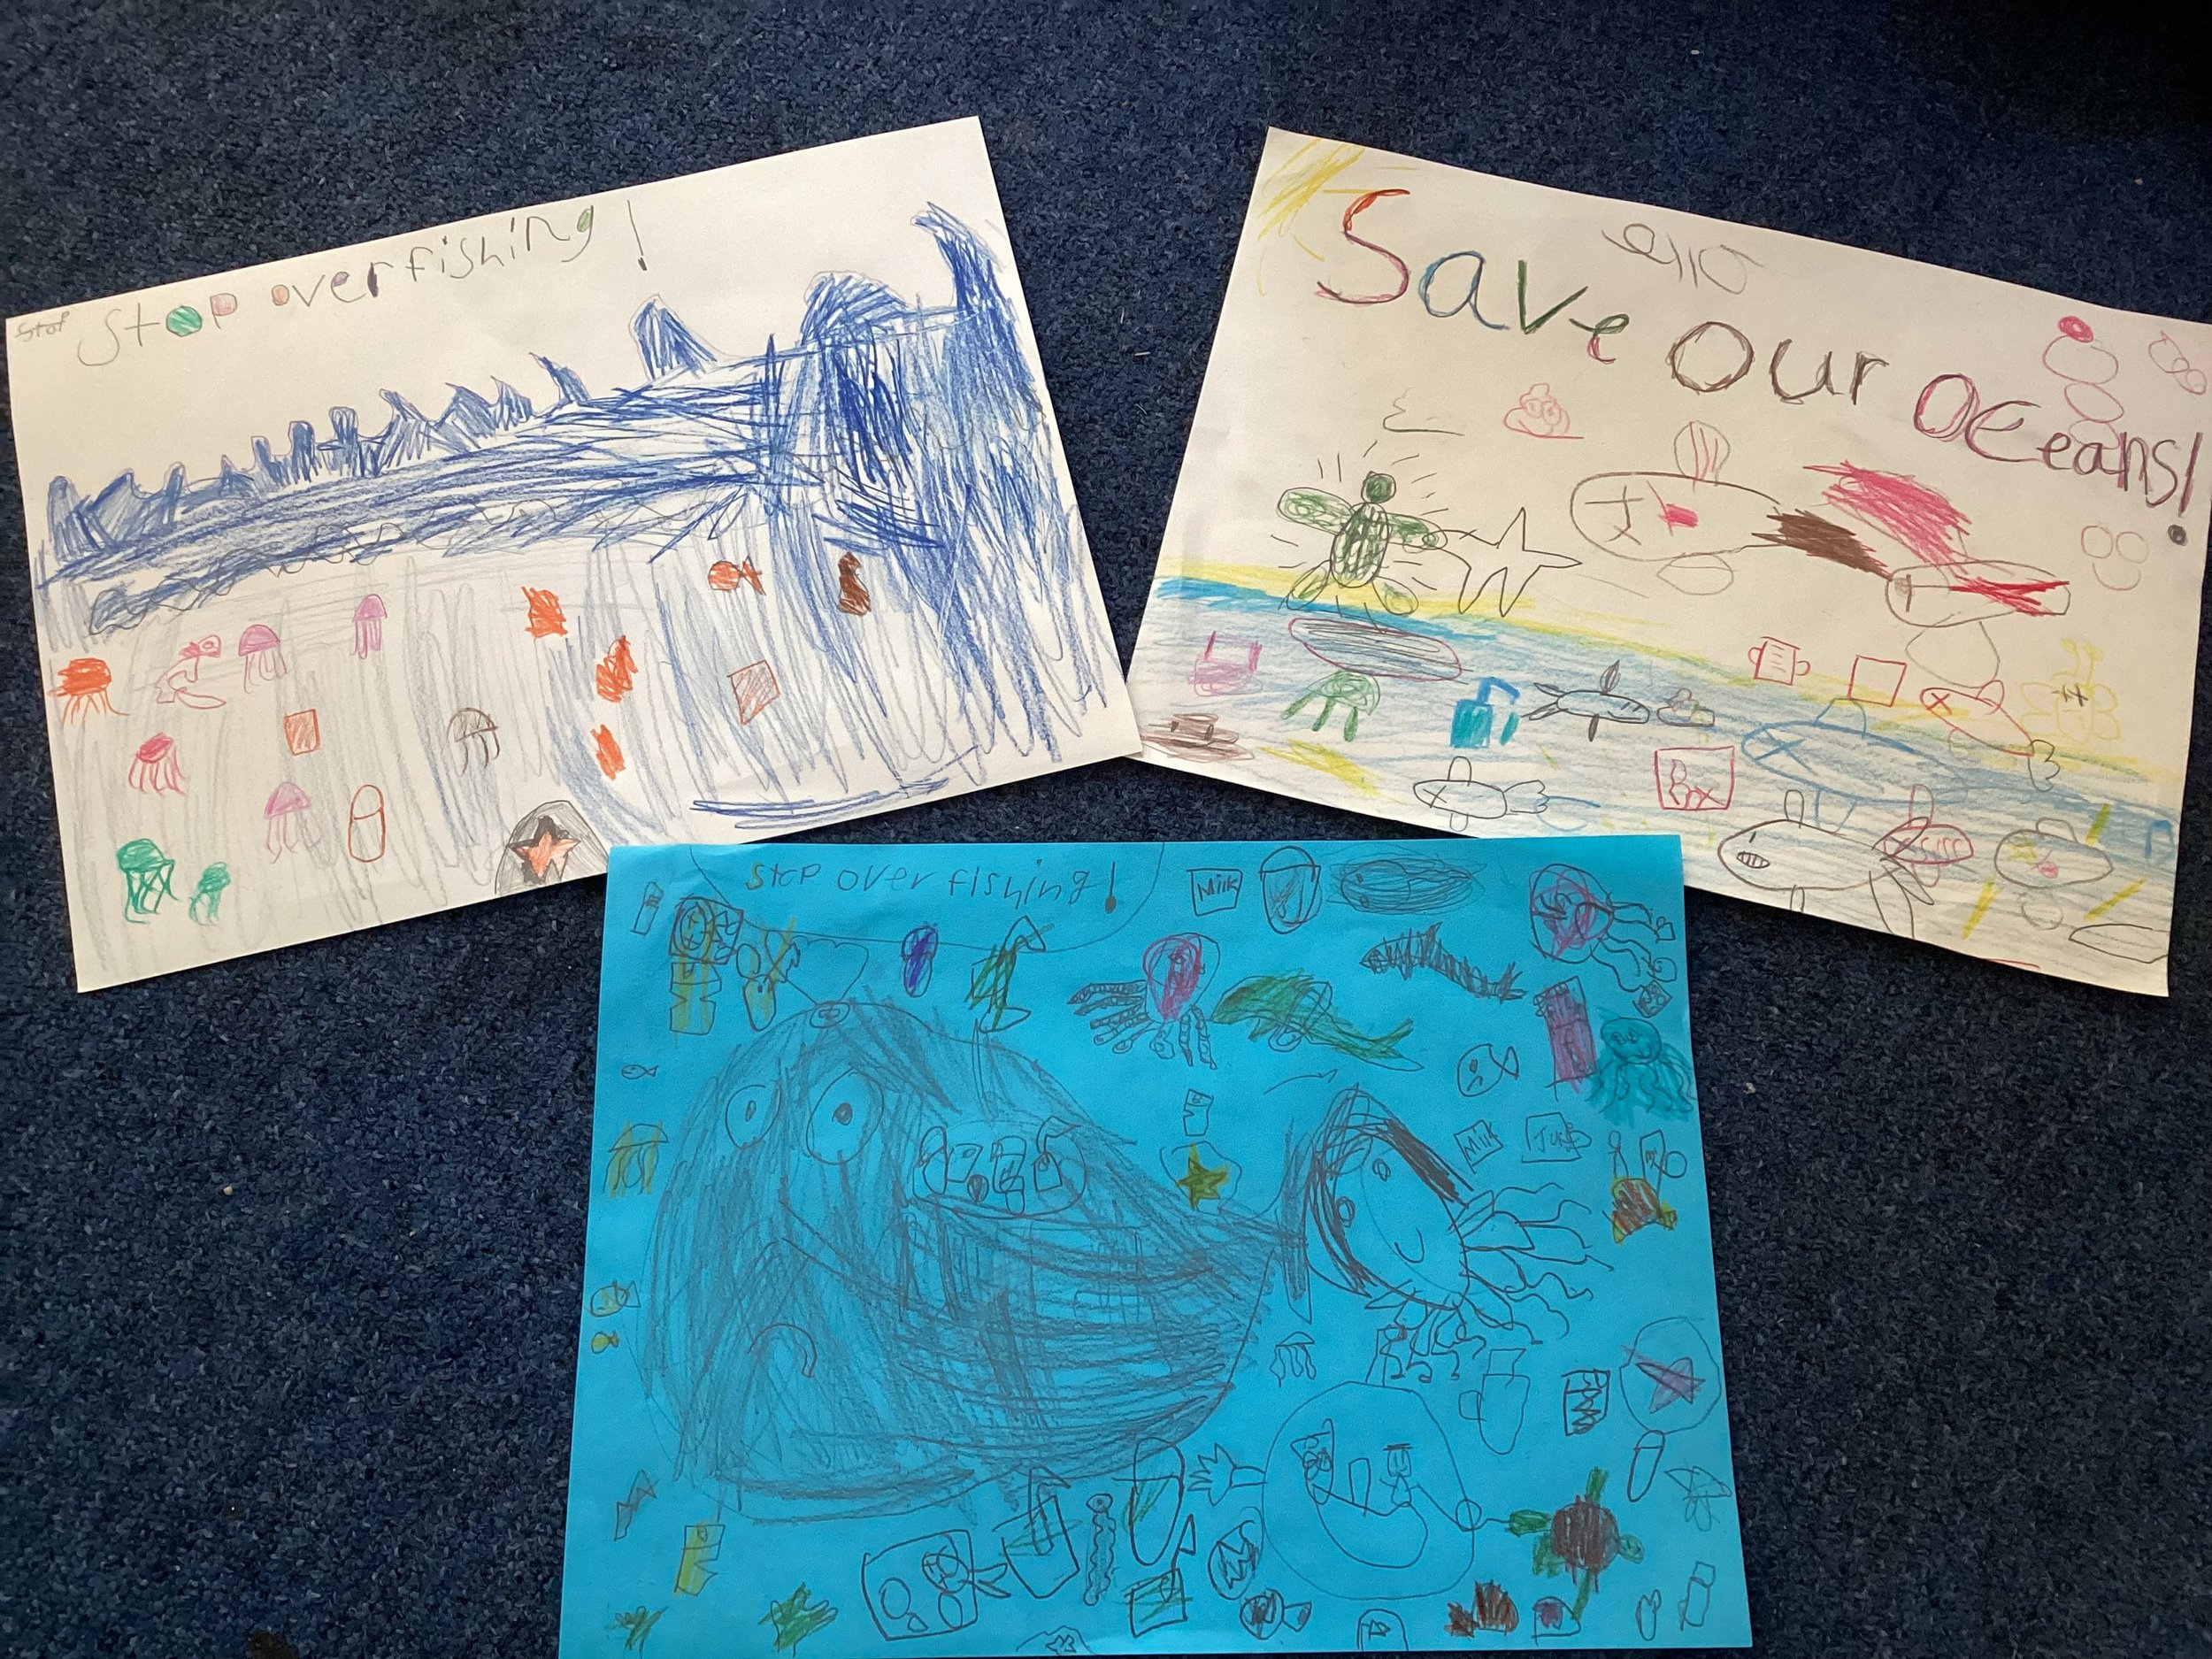 Save Our Oceans Posters!